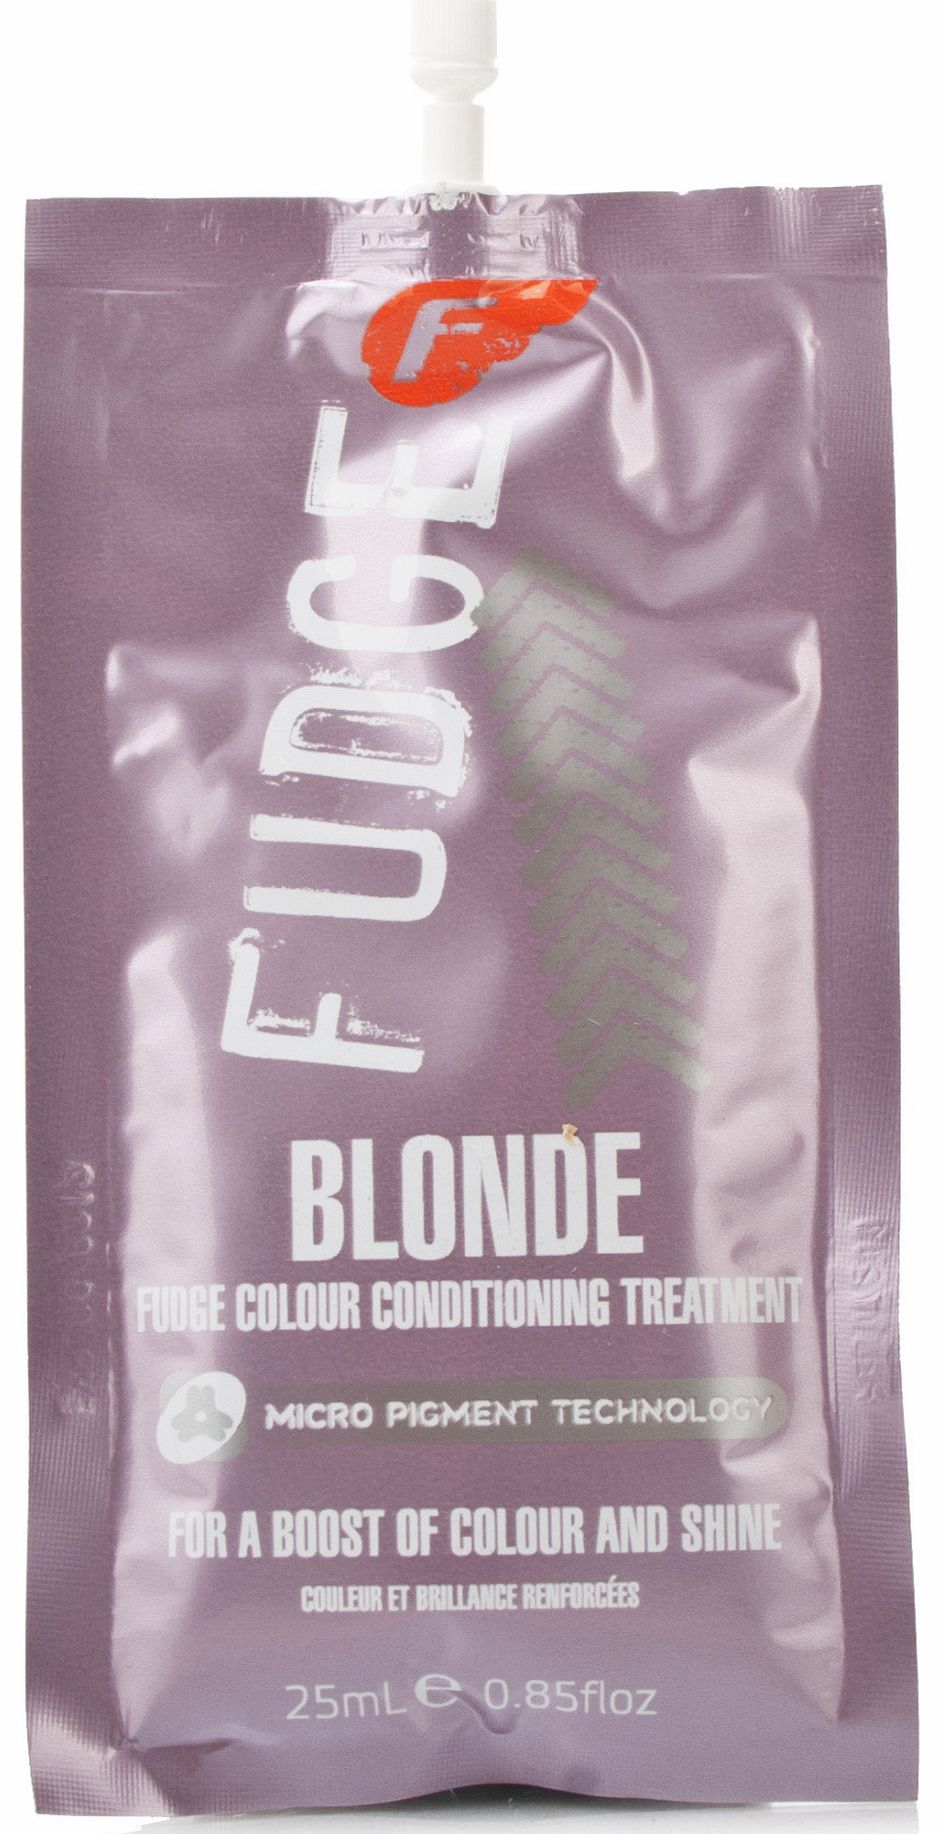 Colour Conditioner for Blondes